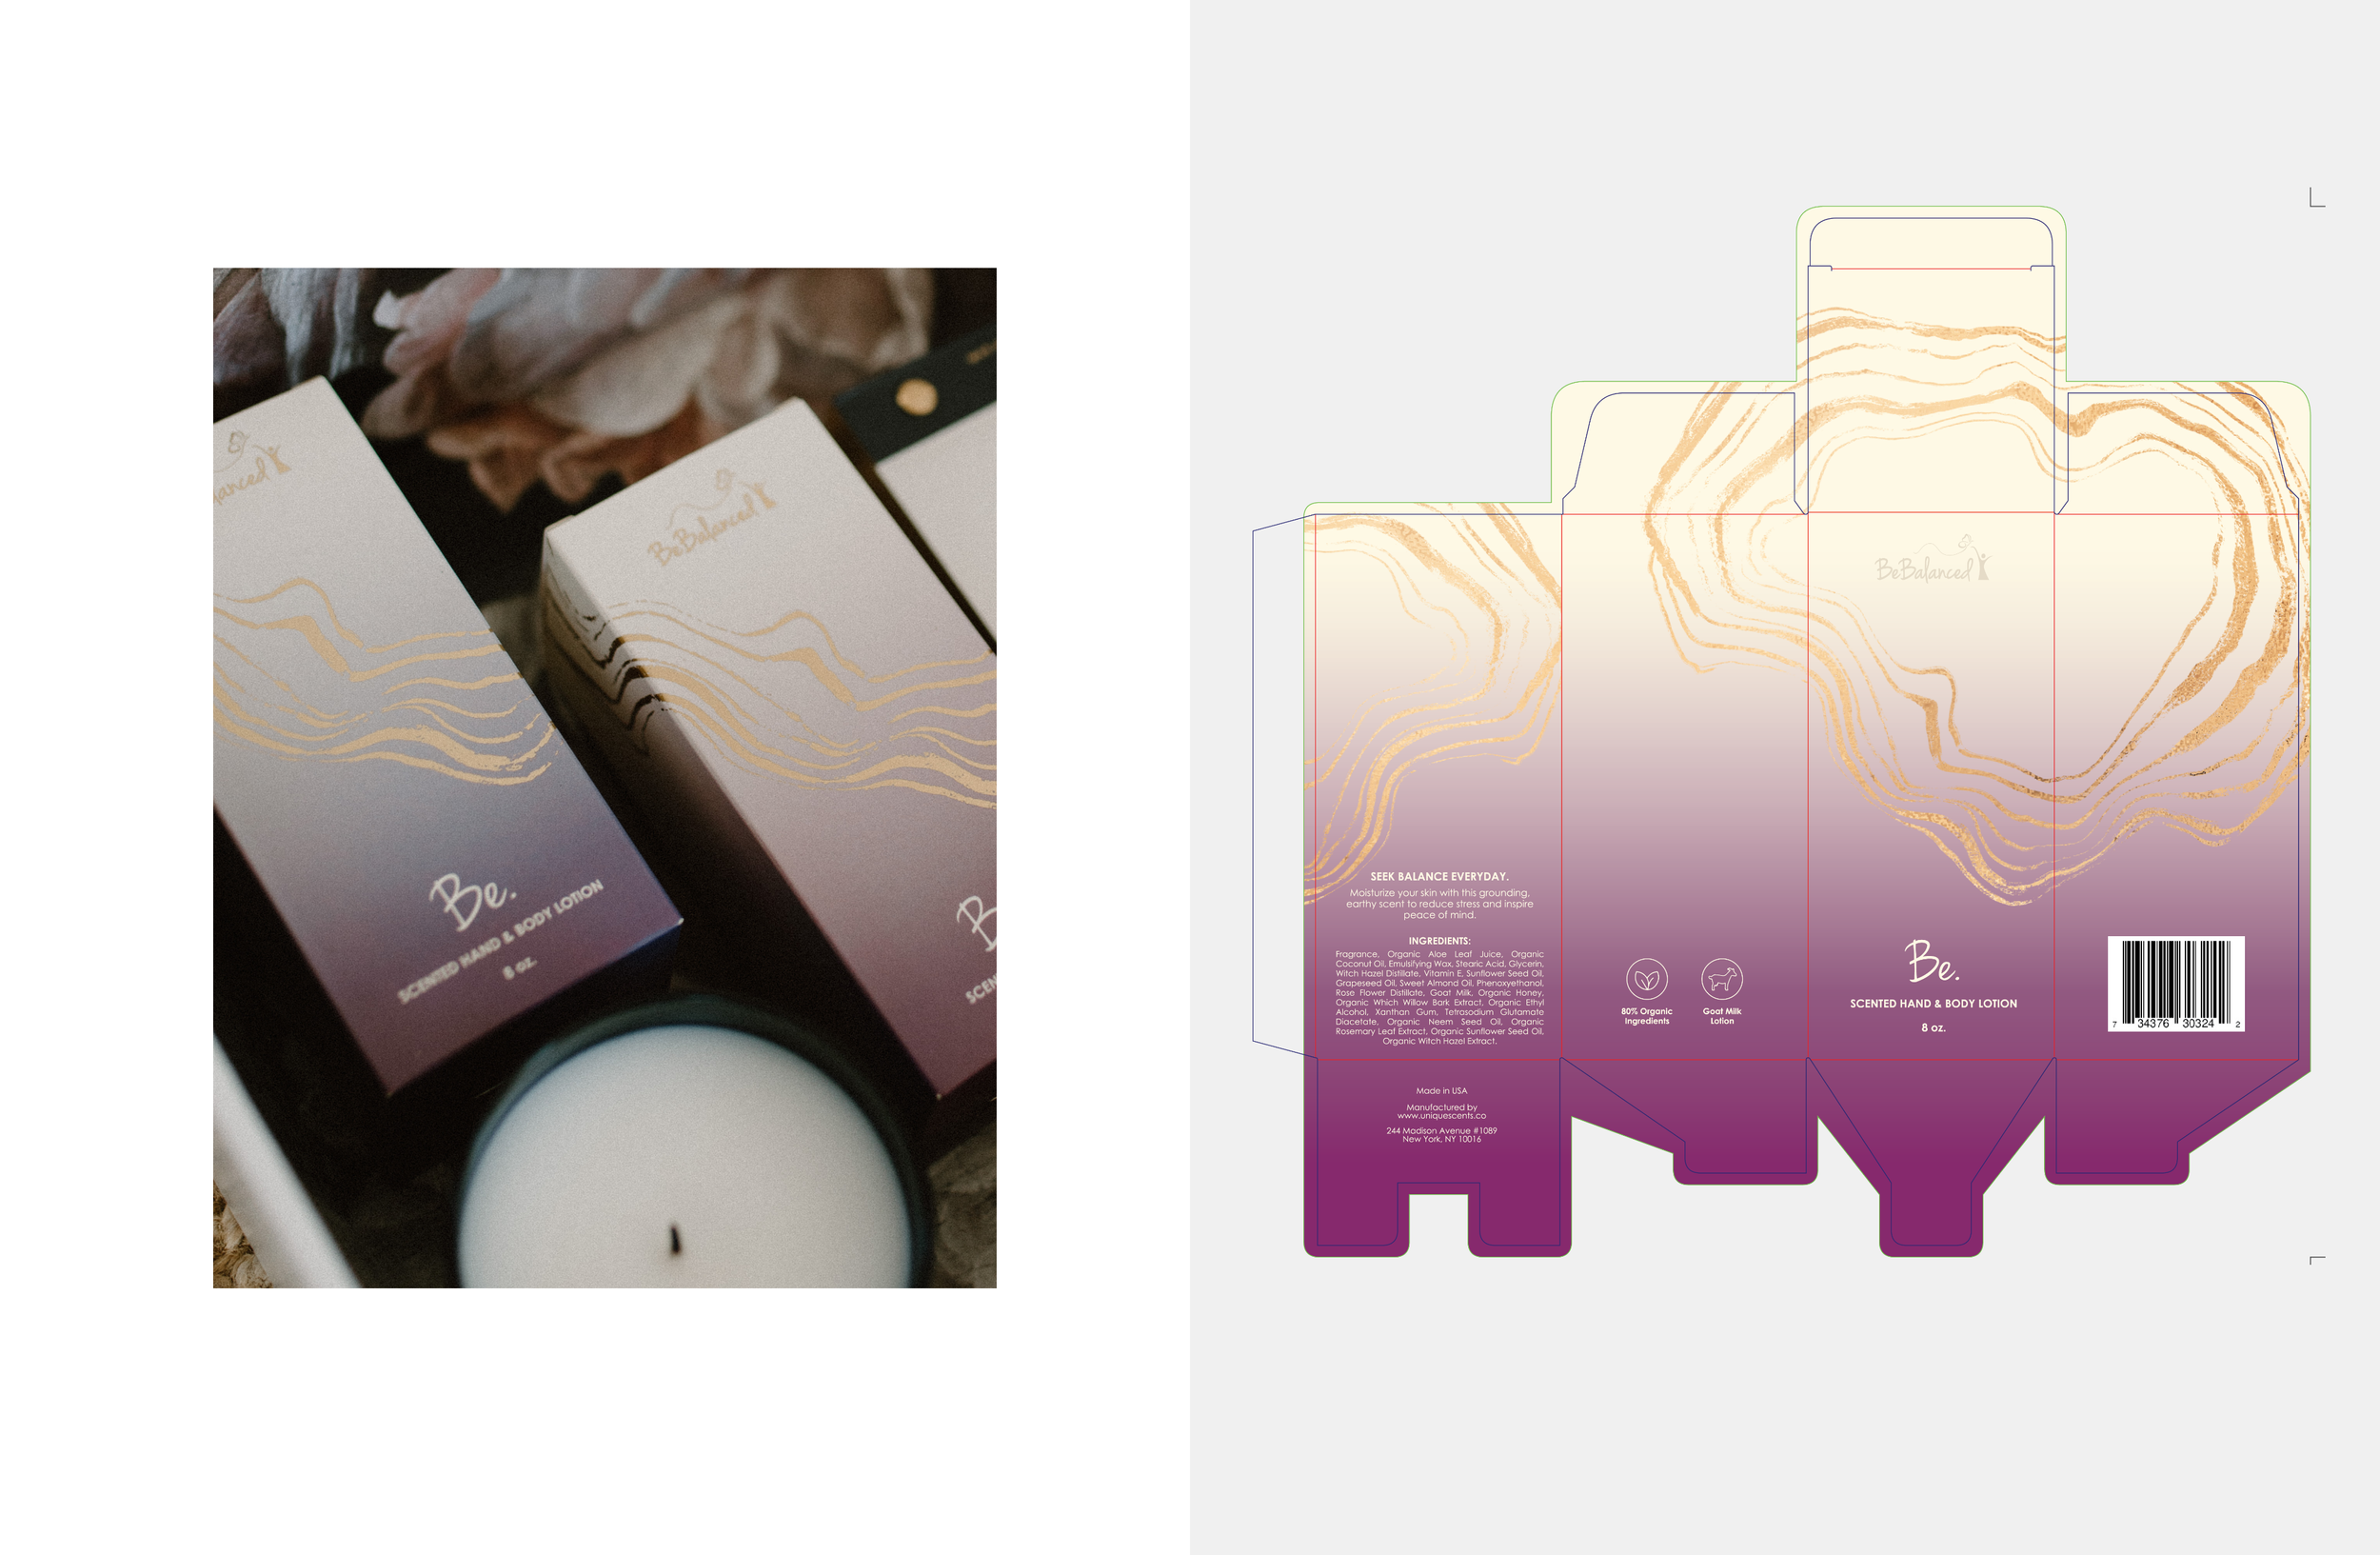 WildHive_BeBalanced-candle-andskincare-packaging_1-1.png